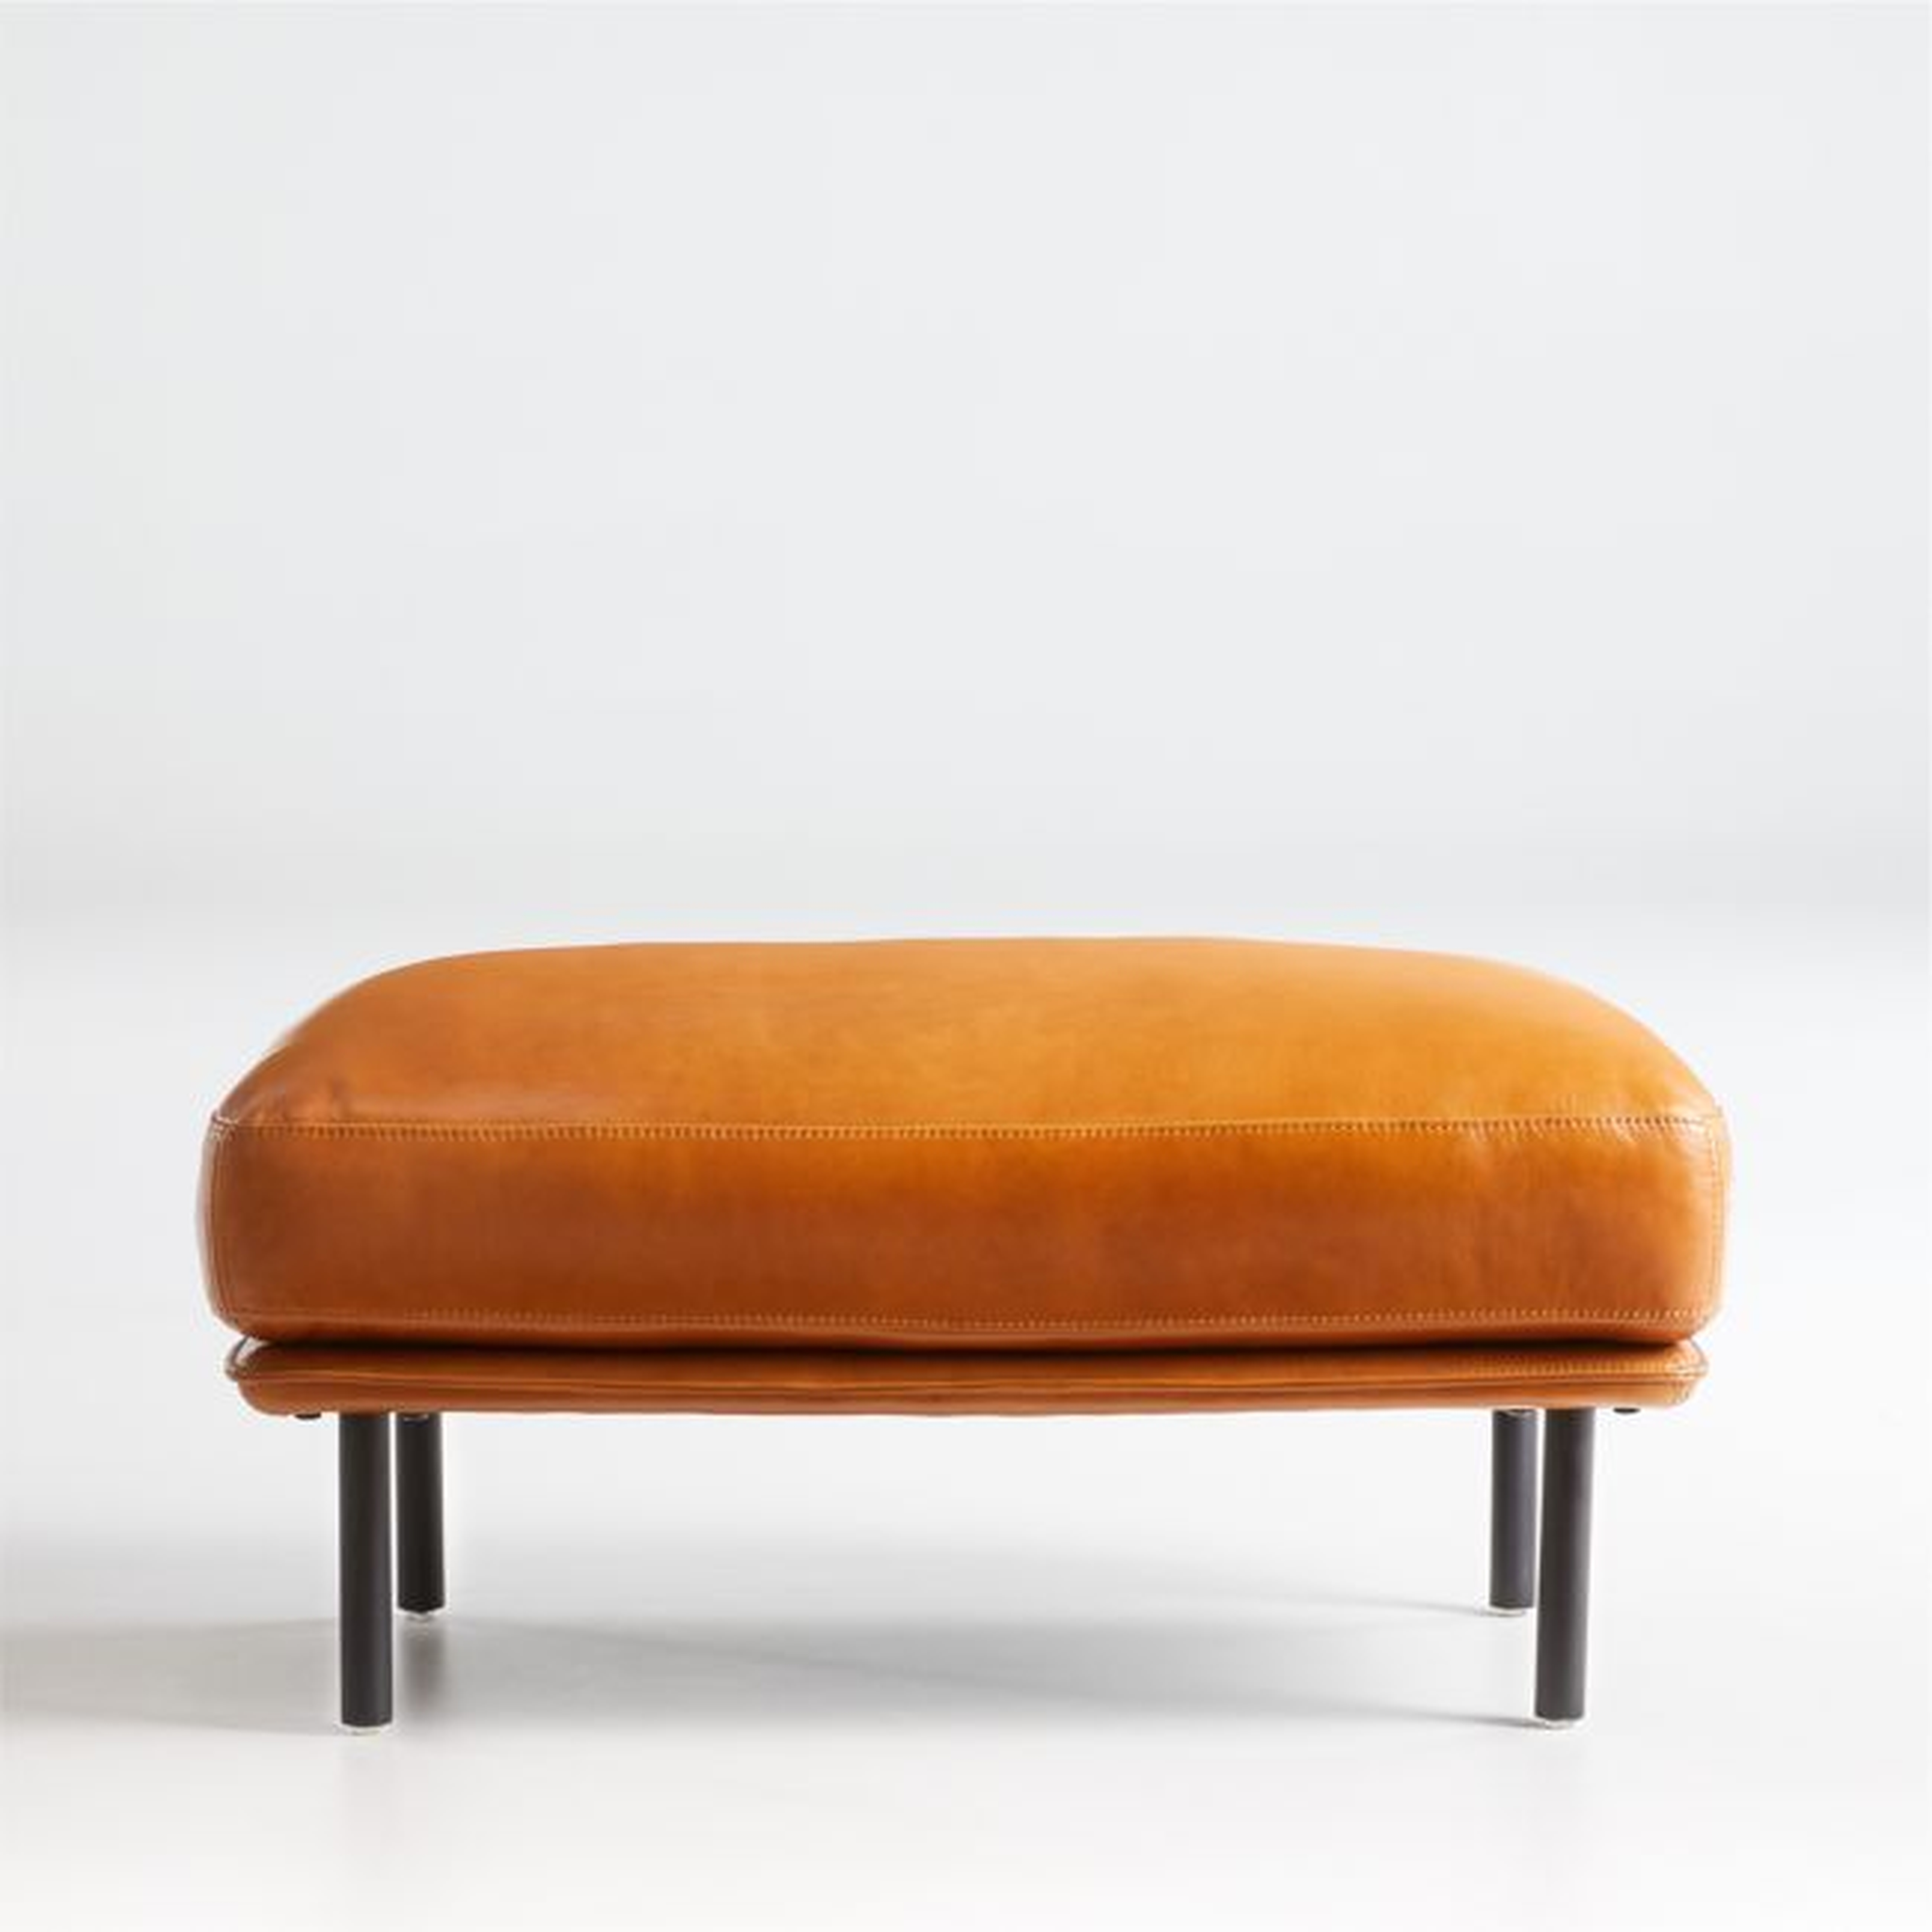 Wells Leather Ottoman - Crate and Barrel